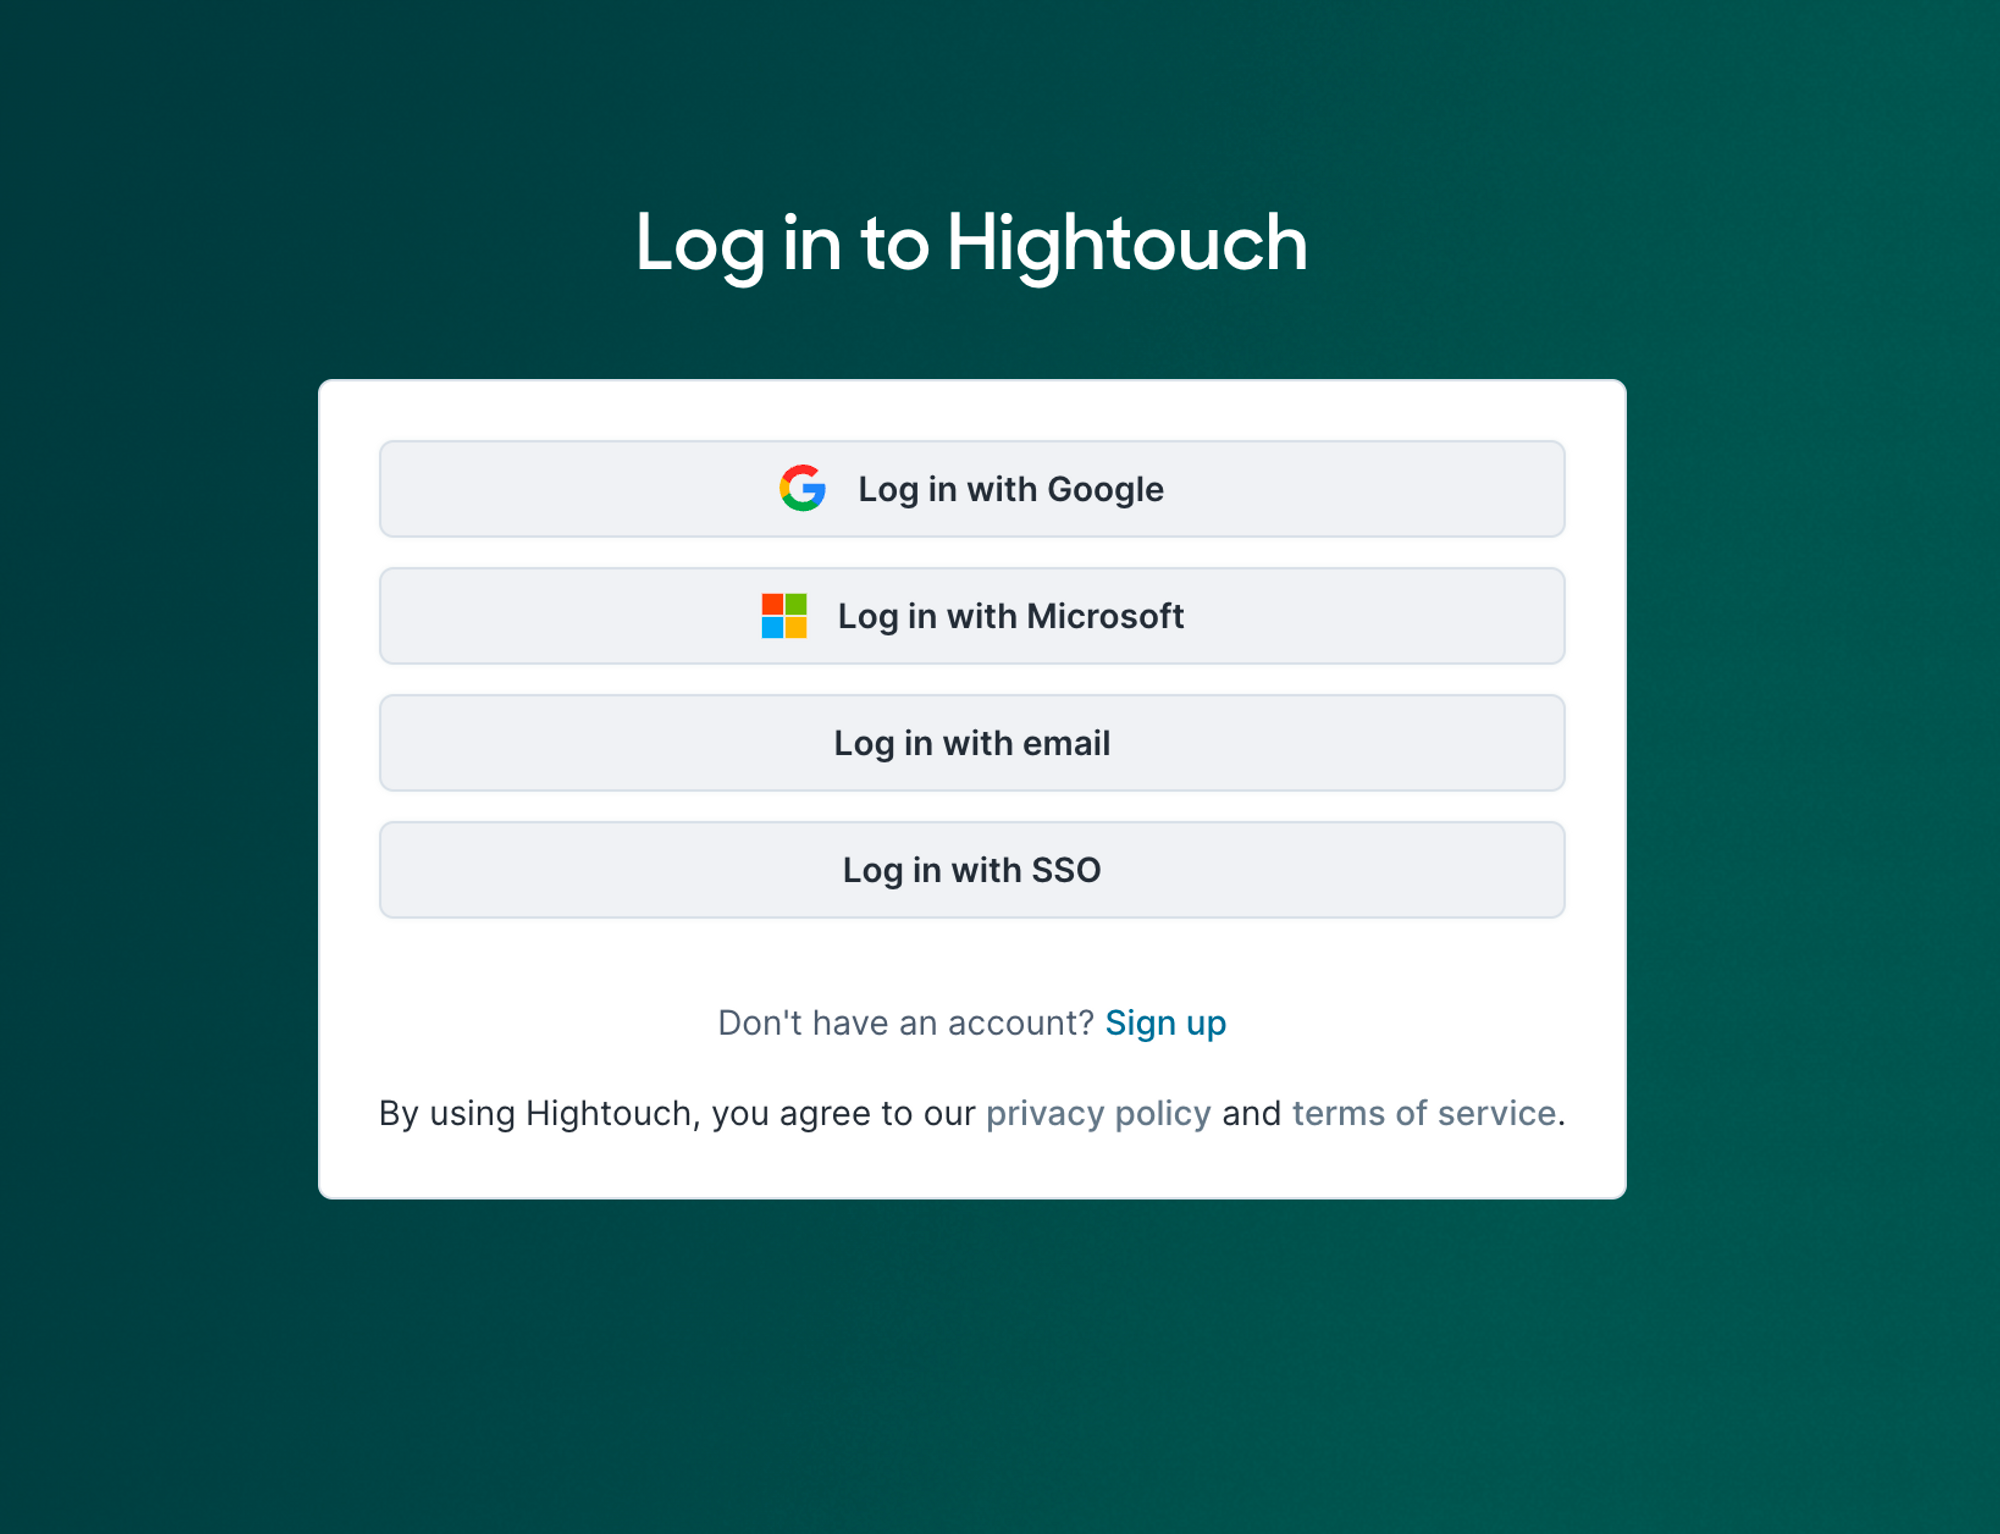 Log in to Hightouch